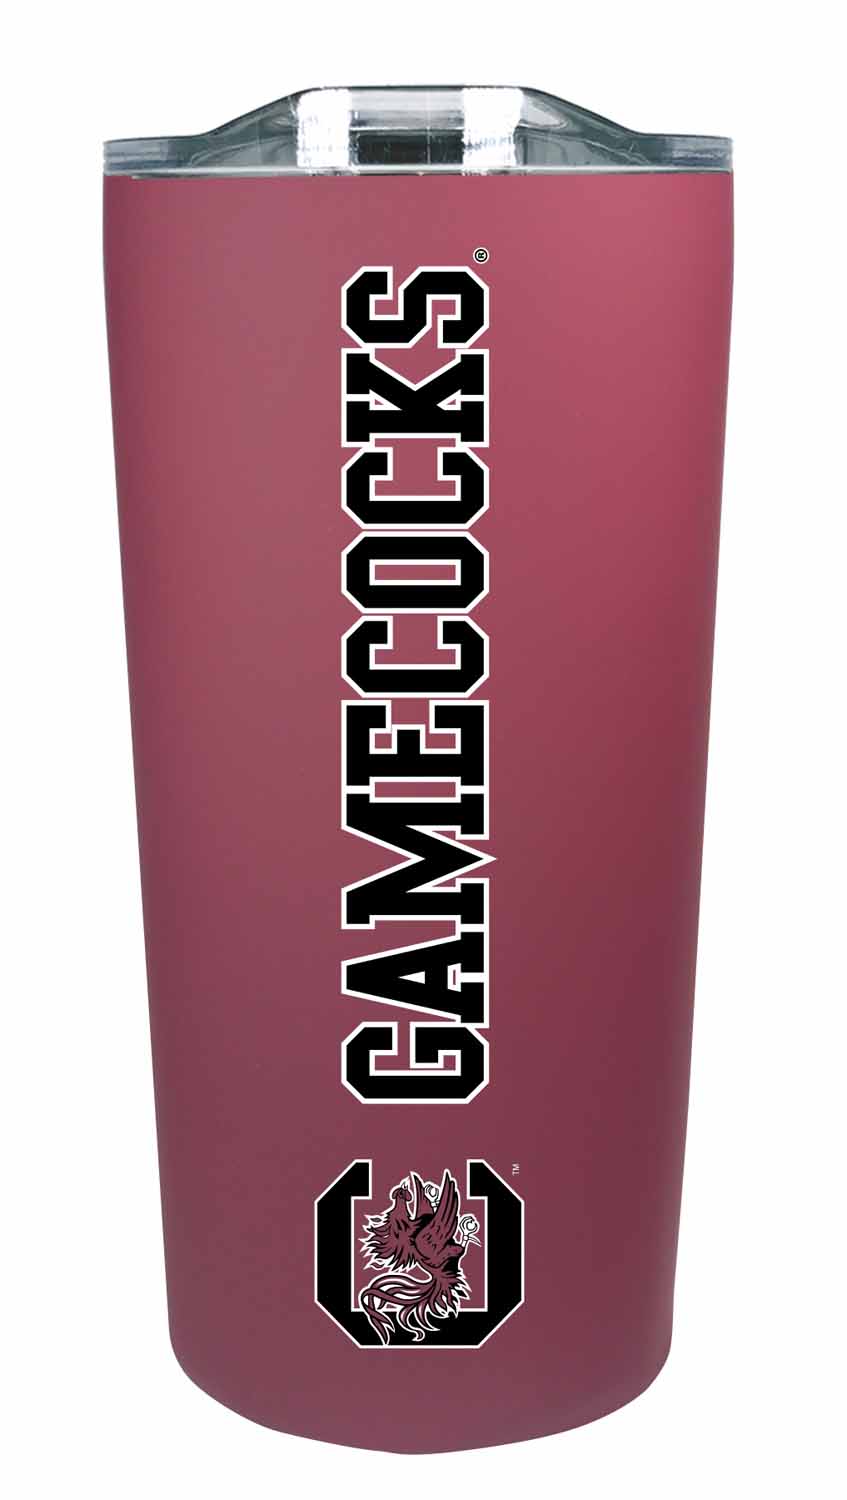 South Carolina Gamecocks NCAA Stainless Steel Tumbler perfect for Gameday - Maroon